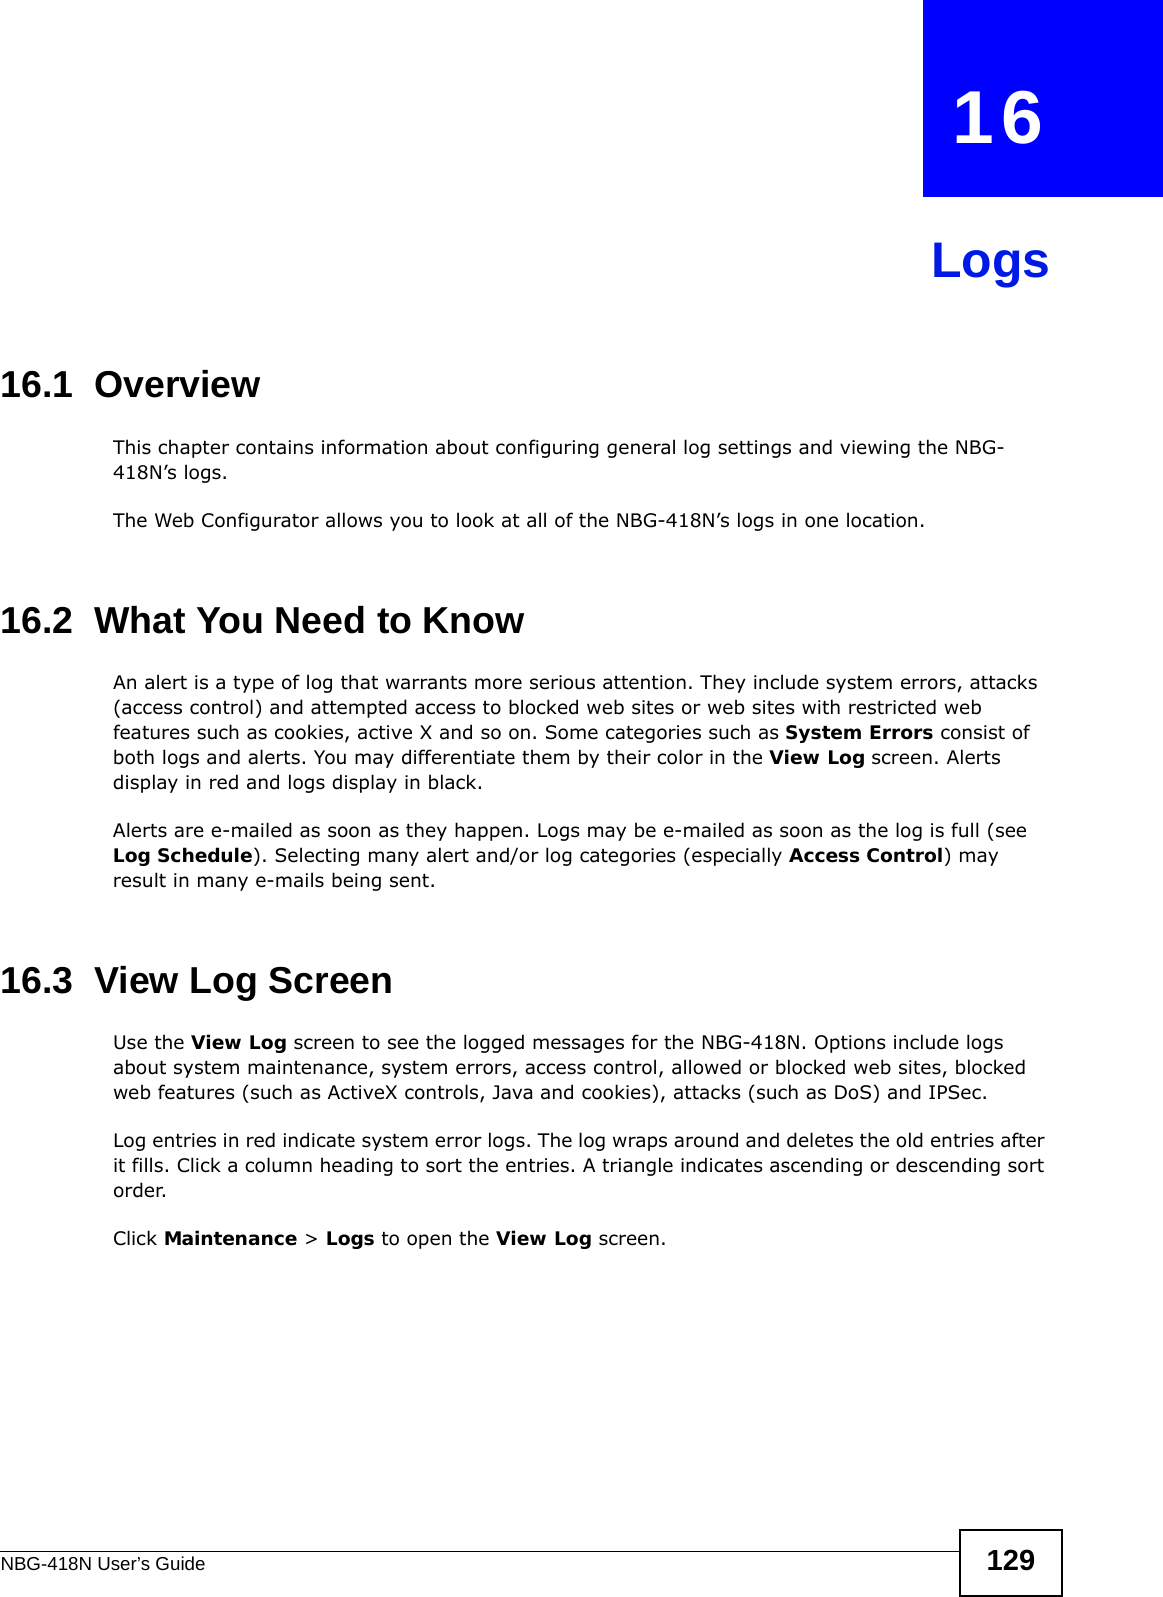 NBG-418N User’s Guide 129CHAPTER   16Logs16.1  OverviewThis chapter contains information about configuring general log settings and viewing the NBG-418N’s logs. The Web Configurator allows you to look at all of the NBG-418N’s logs in one location. 16.2  What You Need to KnowAn alert is a type of log that warrants more serious attention. They include system errors, attacks (access control) and attempted access to blocked web sites or web sites with restricted web features such as cookies, active X and so on. Some categories such as System Errors consist of both logs and alerts. You may differentiate them by their color in the View Log screen. Alerts display in red and logs display in black.Alerts are e-mailed as soon as they happen. Logs may be e-mailed as soon as the log is full (see Log Schedule). Selecting many alert and/or log categories (especially Access Control) may result in many e-mails being sent.16.3  View Log ScreenUse the View Log screen to see the logged messages for the NBG-418N. Options include logs about system maintenance, system errors, access control, allowed or blocked web sites, blocked web features (such as ActiveX controls, Java and cookies), attacks (such as DoS) and IPSec.Log entries in red indicate system error logs. The log wraps around and deletes the old entries after it fills. Click a column heading to sort the entries. A triangle indicates ascending or descending sort order. Click Maintenance &gt; Logs to open the View Log screen.